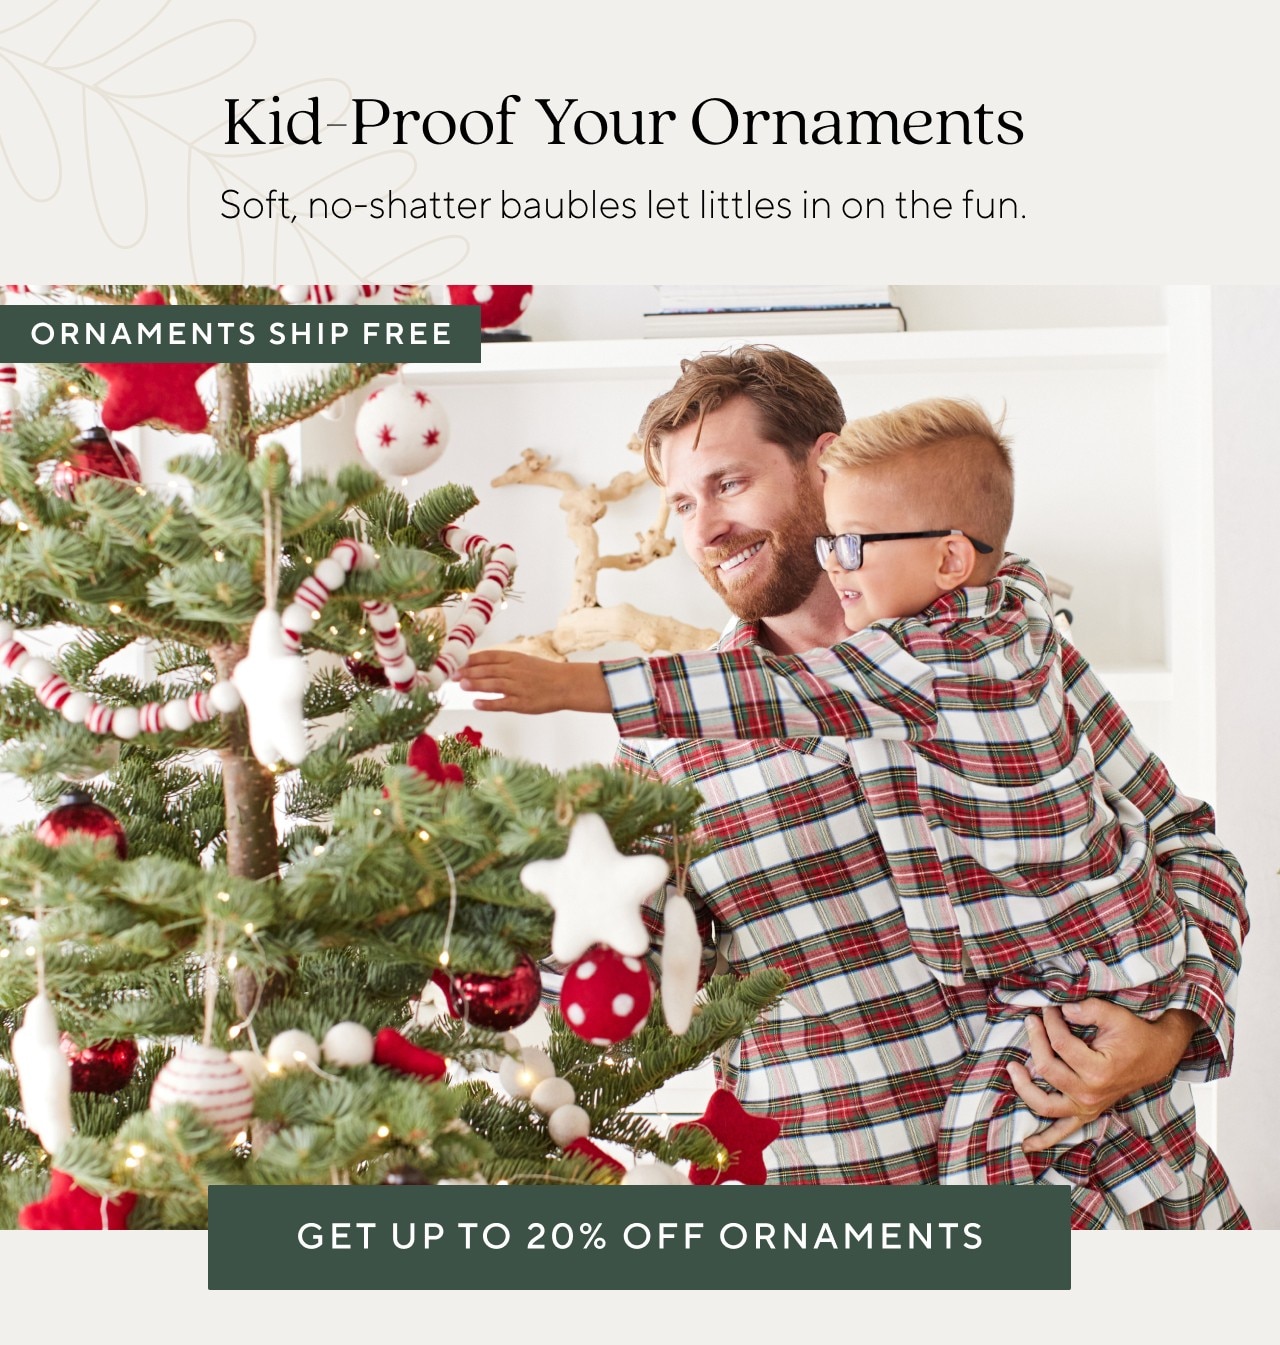 GET UP TO 20% OFF ORNAMENTS